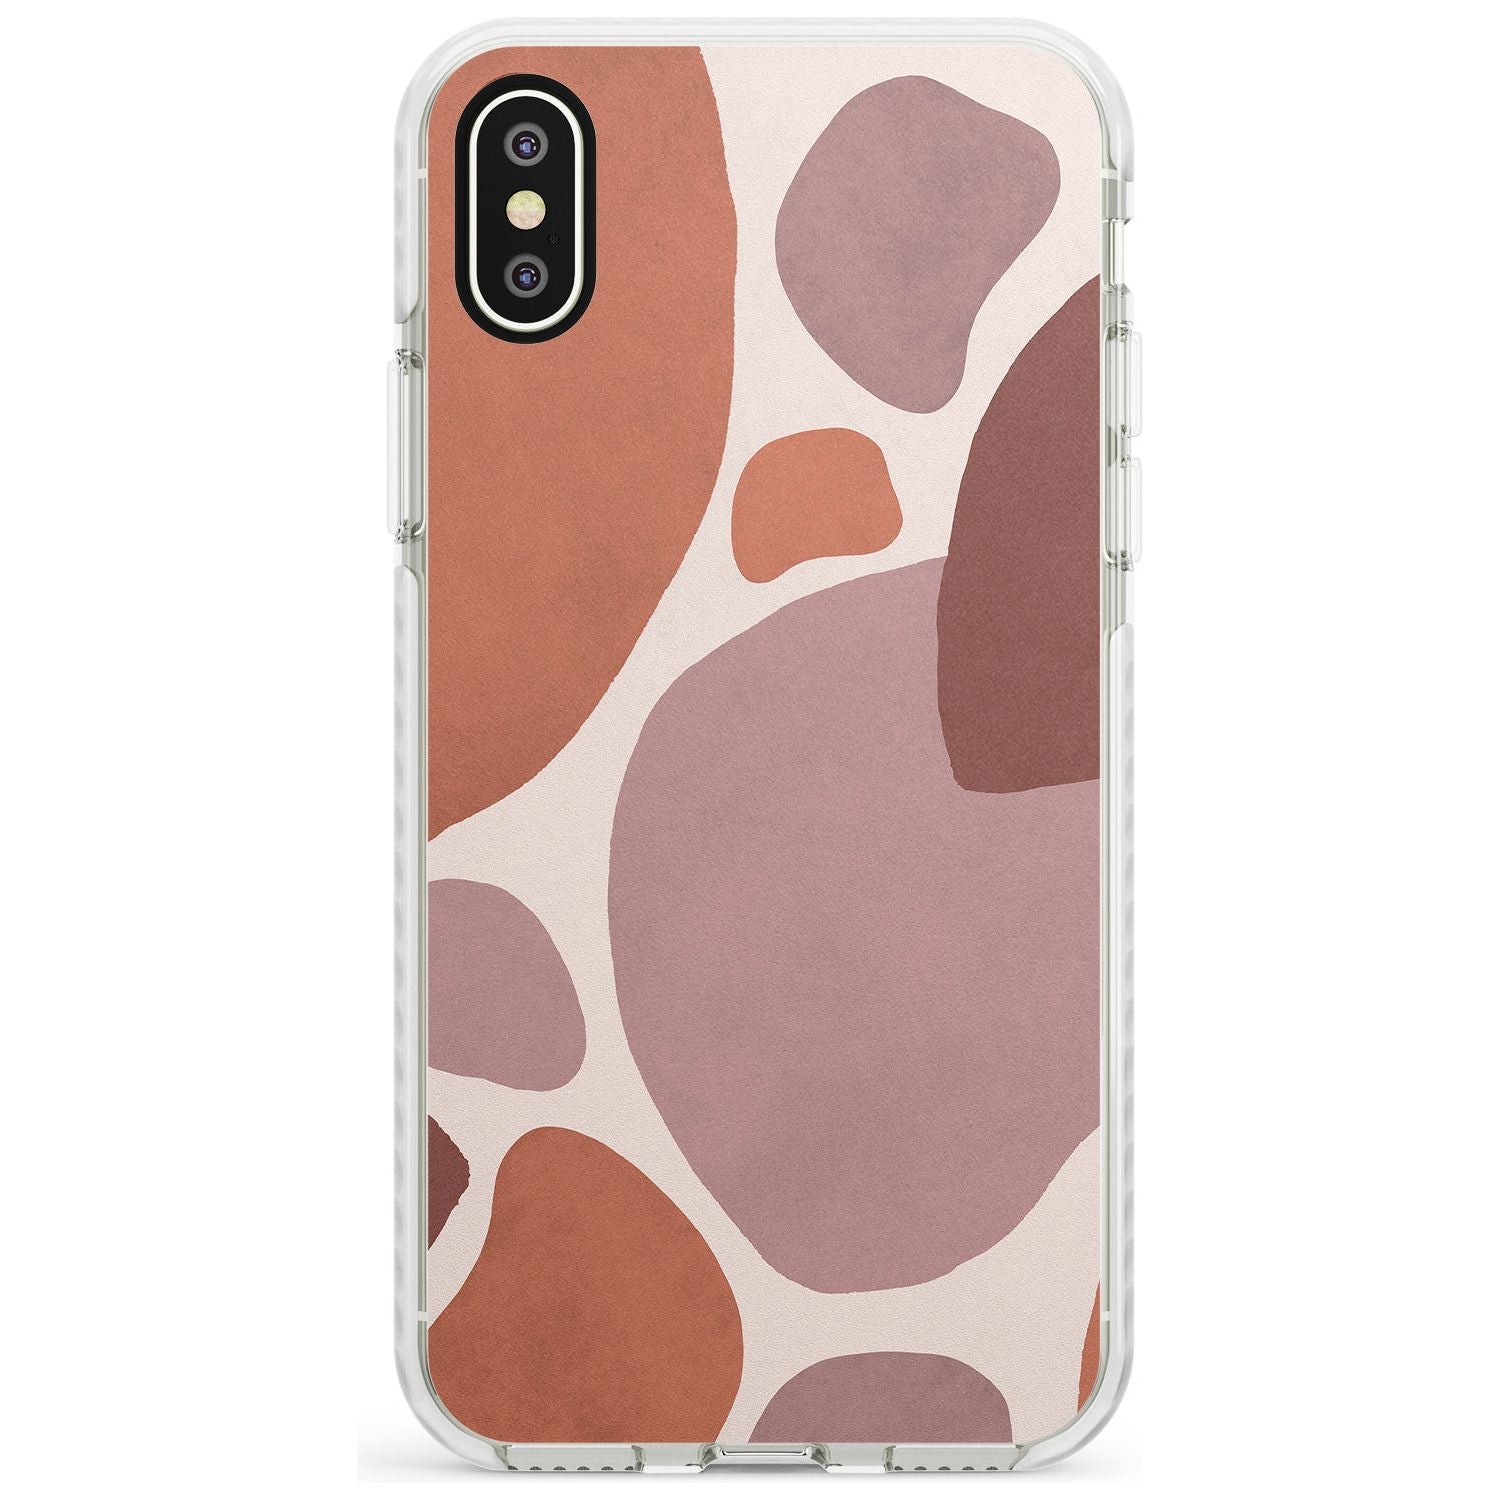 Lush Abstract Watercolour Impact Phone Case for iPhone X XS Max XR